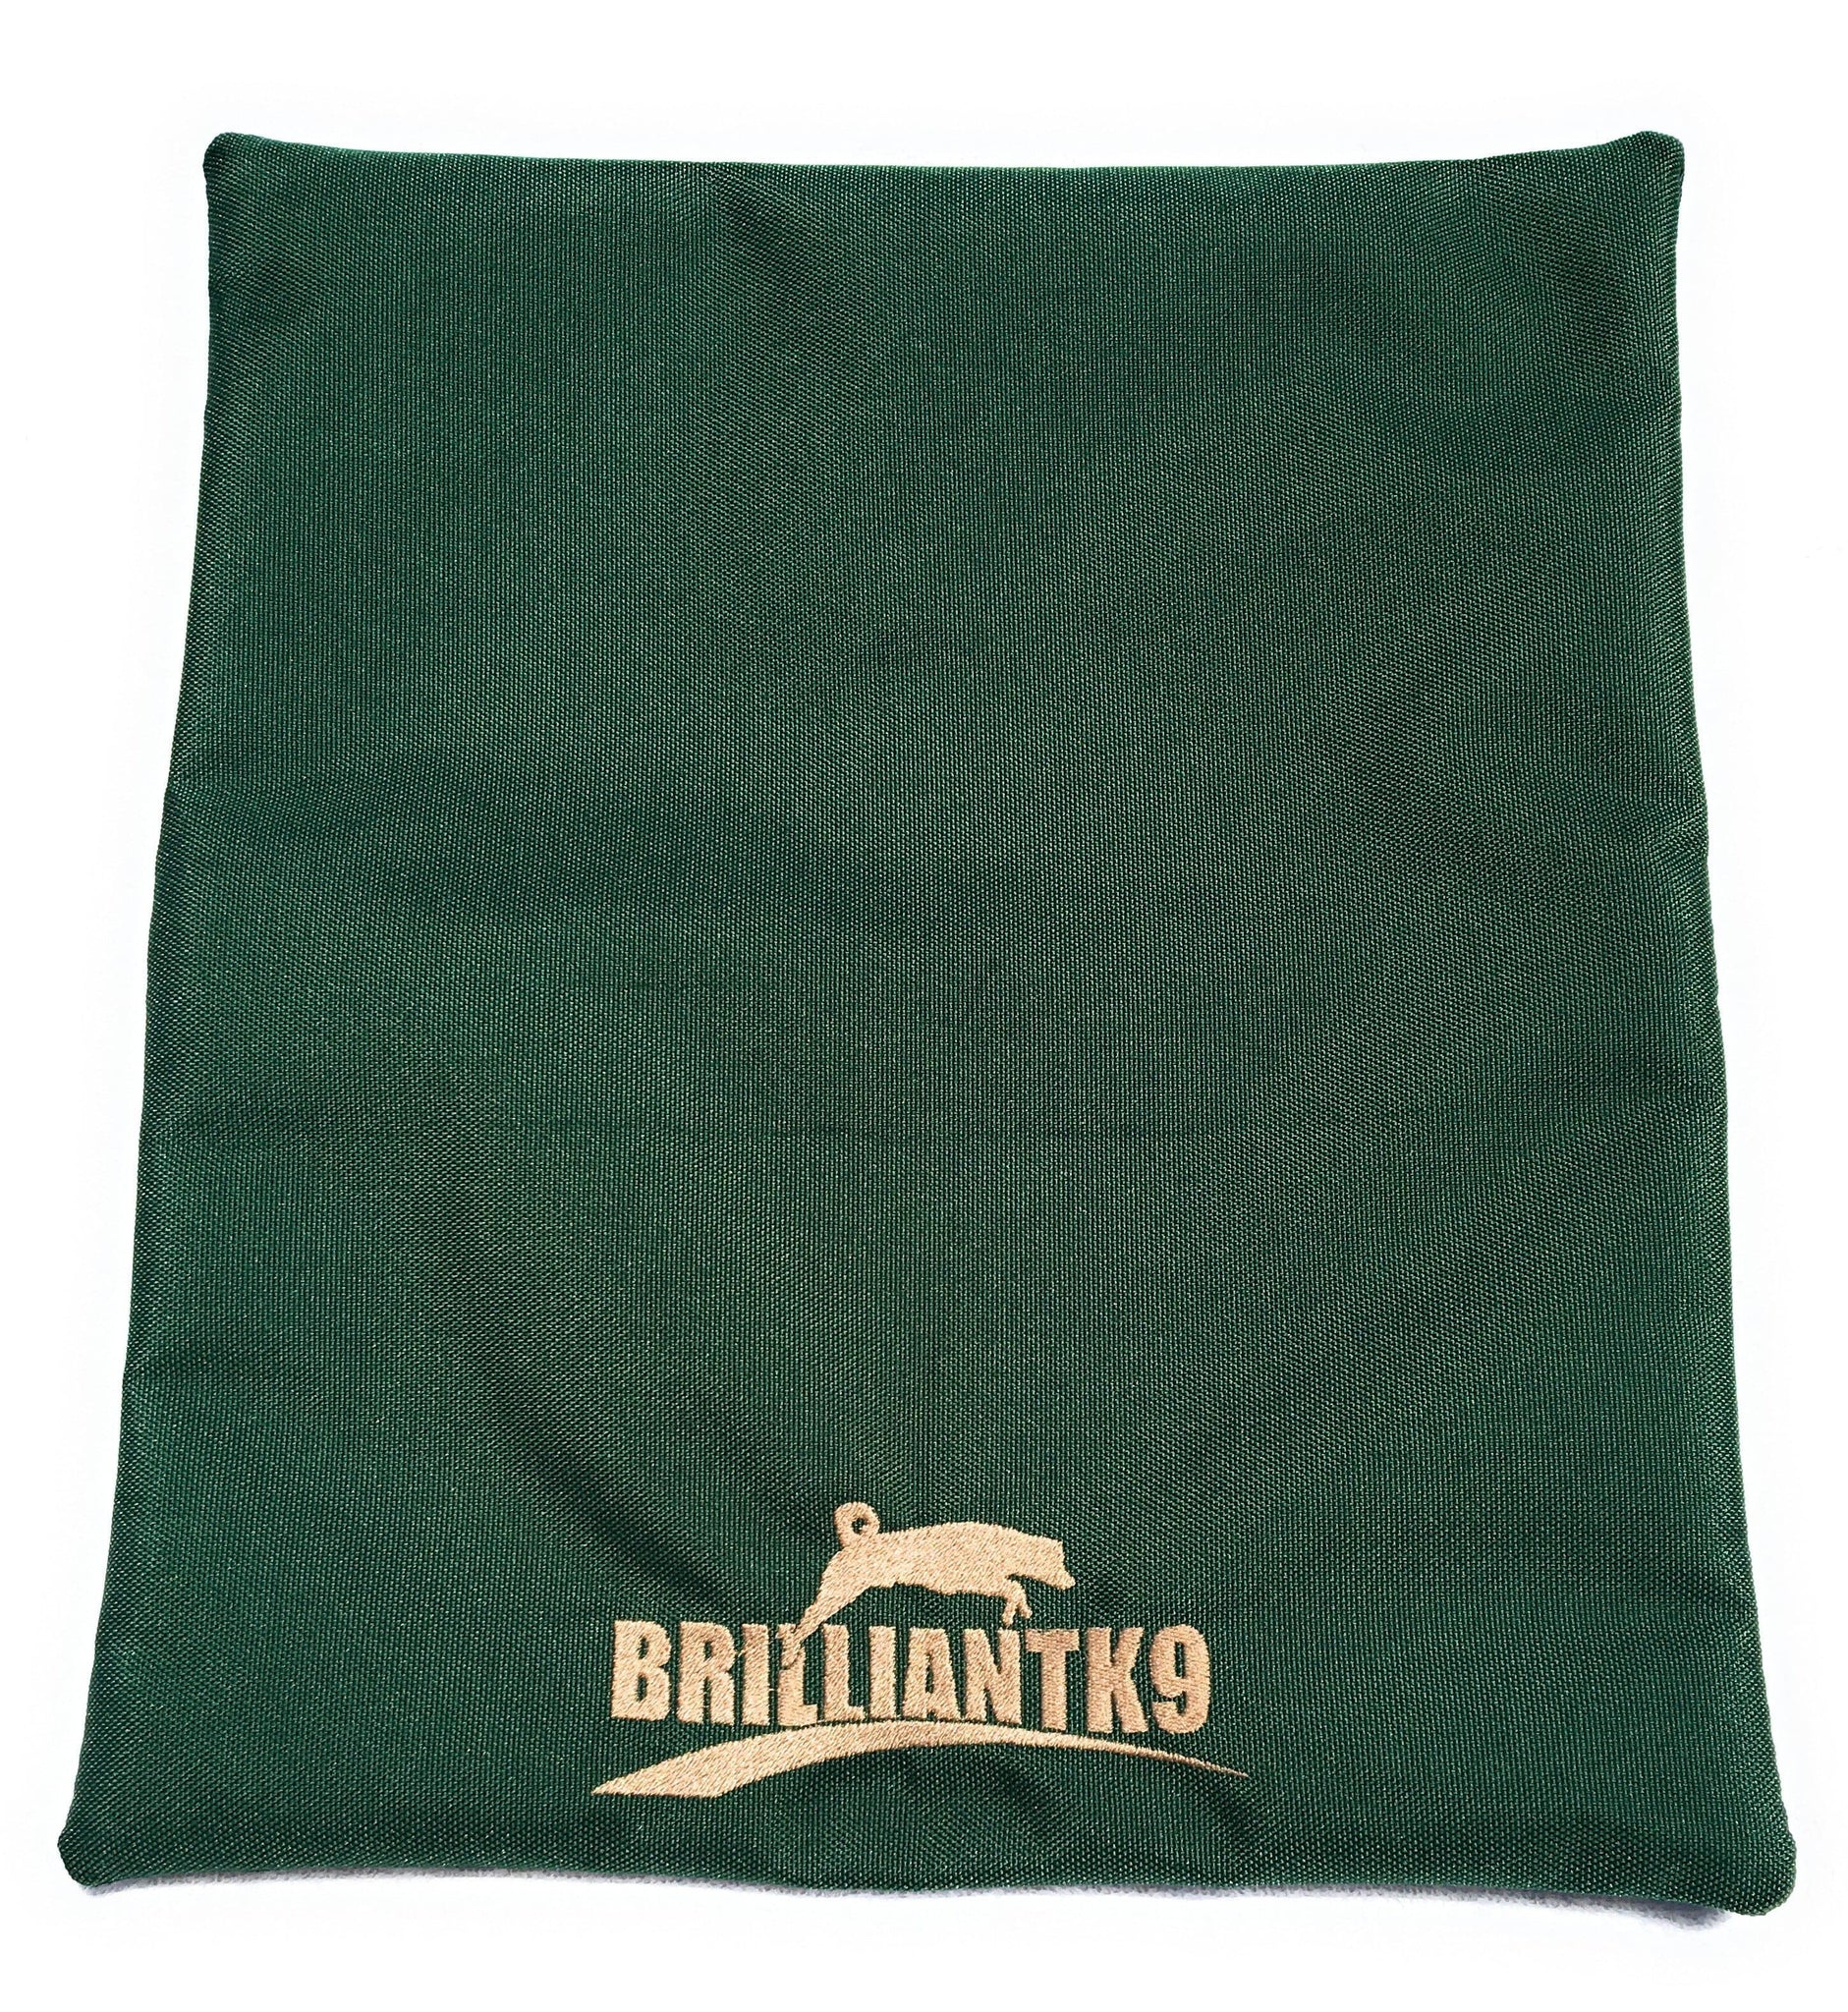 Green 24-Inch Embroidered Crate Pad Cover